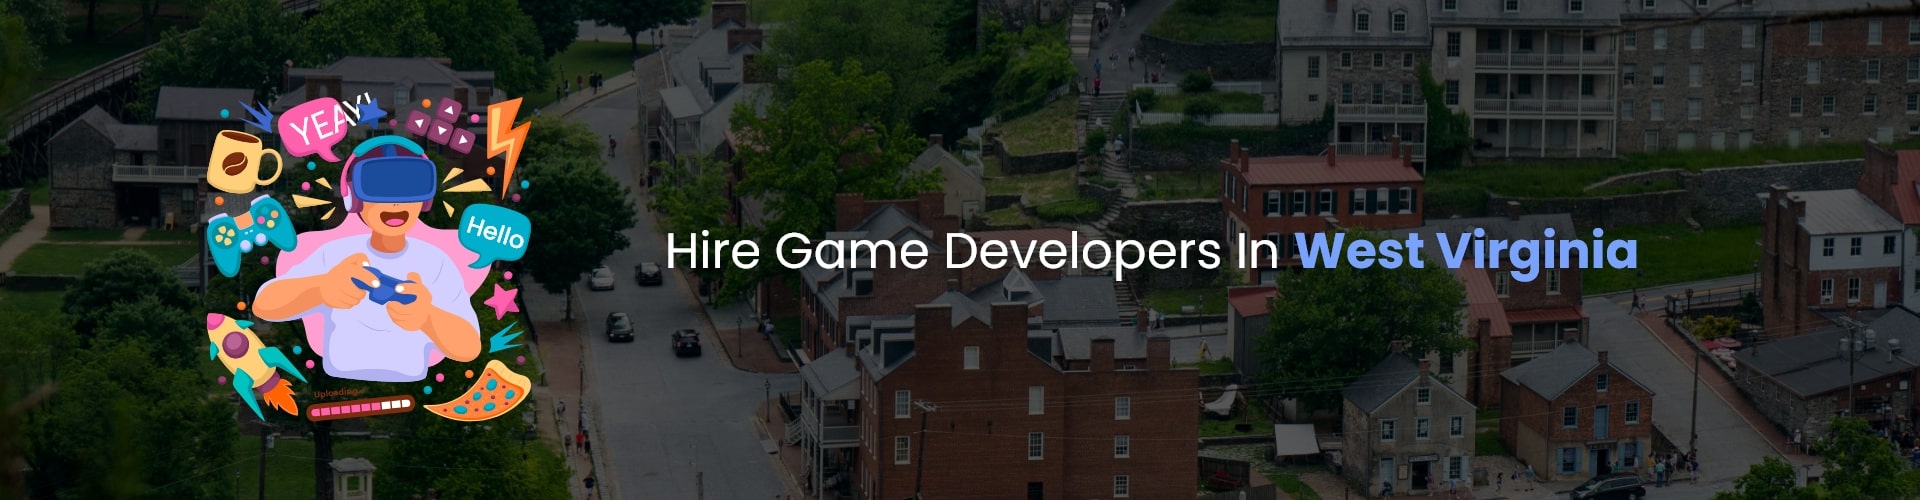 hire game developers in west virginia